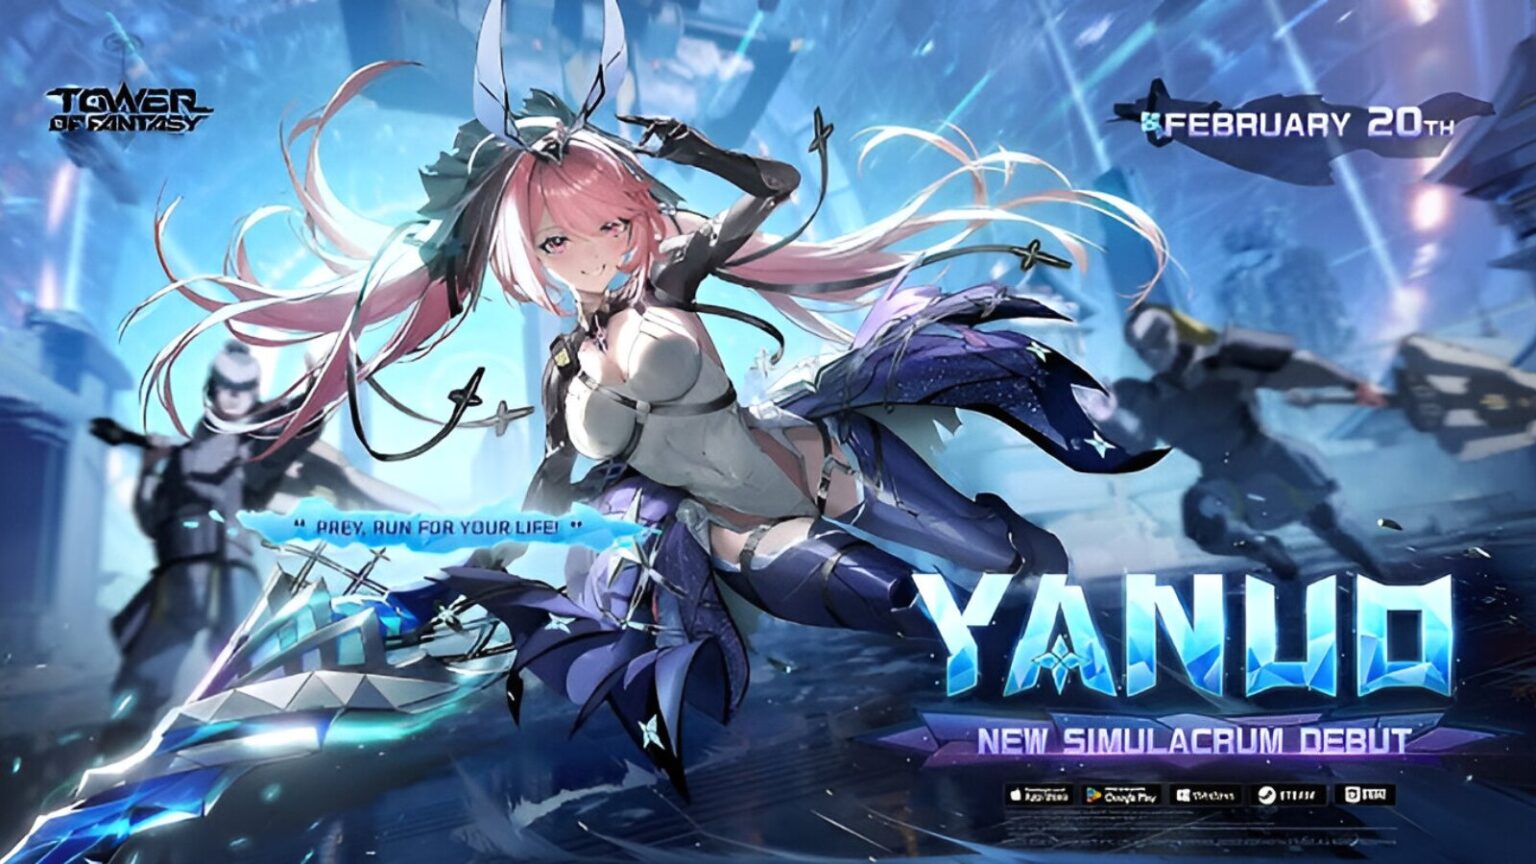 Tower of Fantasy reveals new character Yanuo